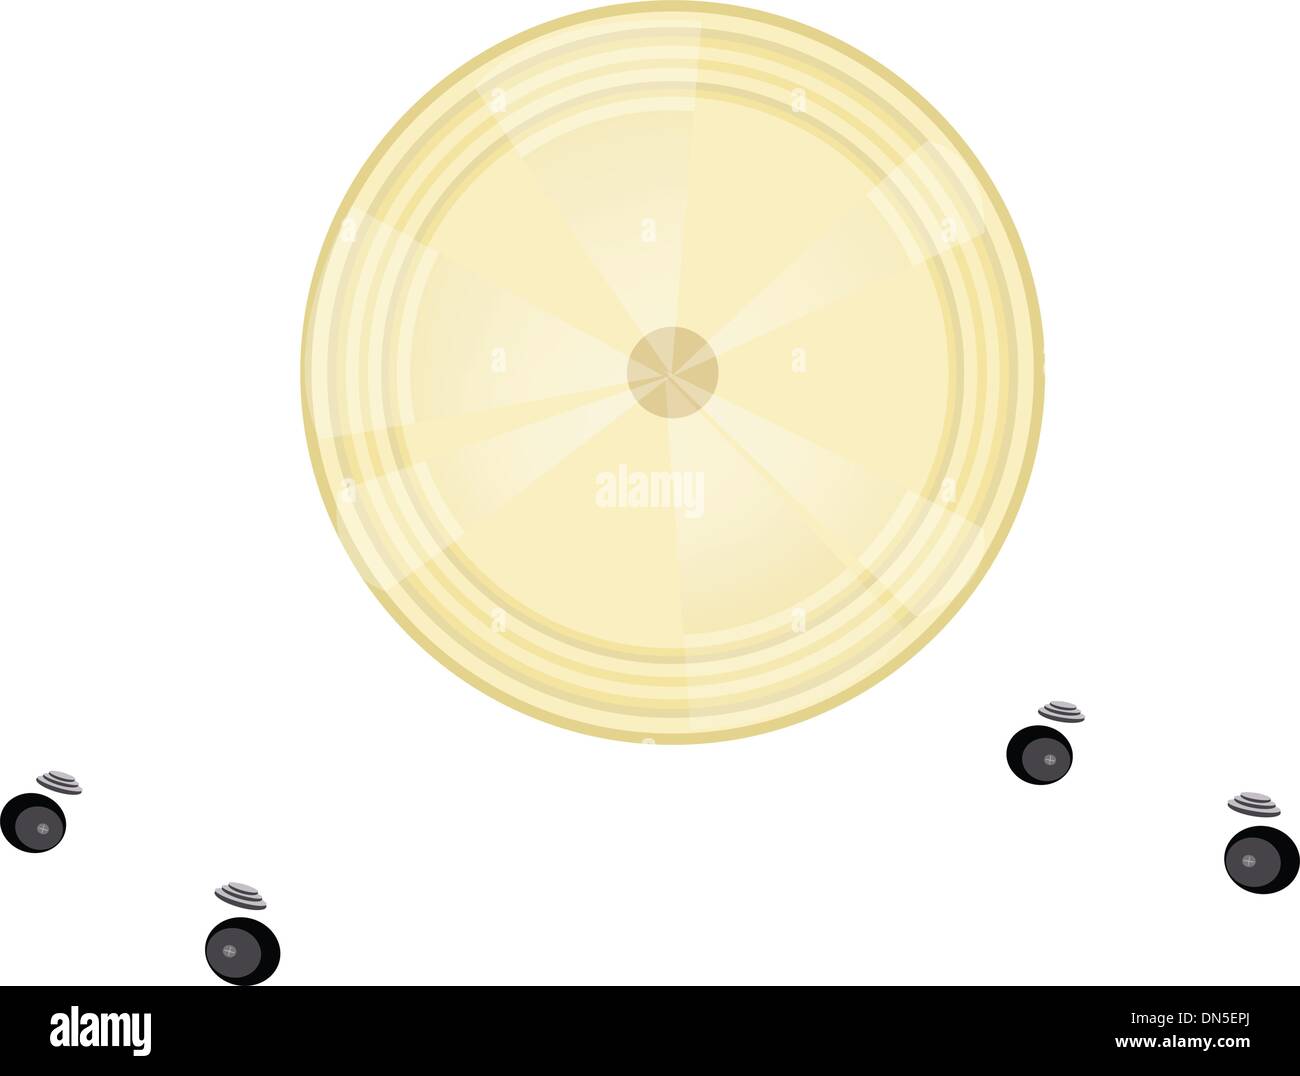 A Musical Gong Isolated on White Background Stock Vector